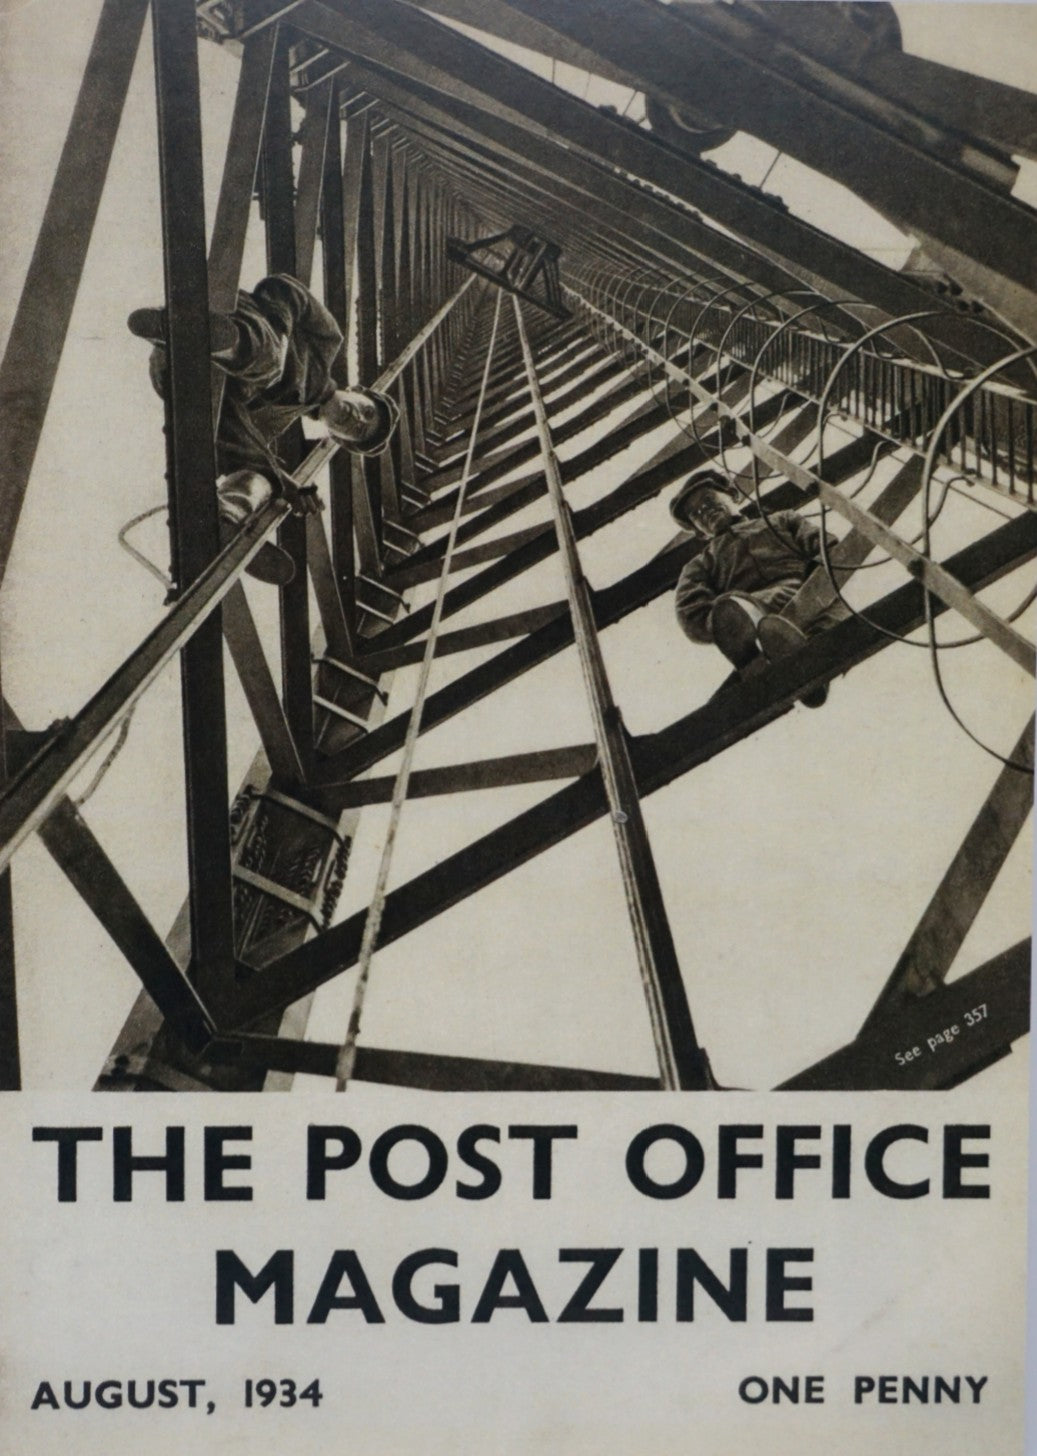 Post Office Magazine Covers Postcard Pack